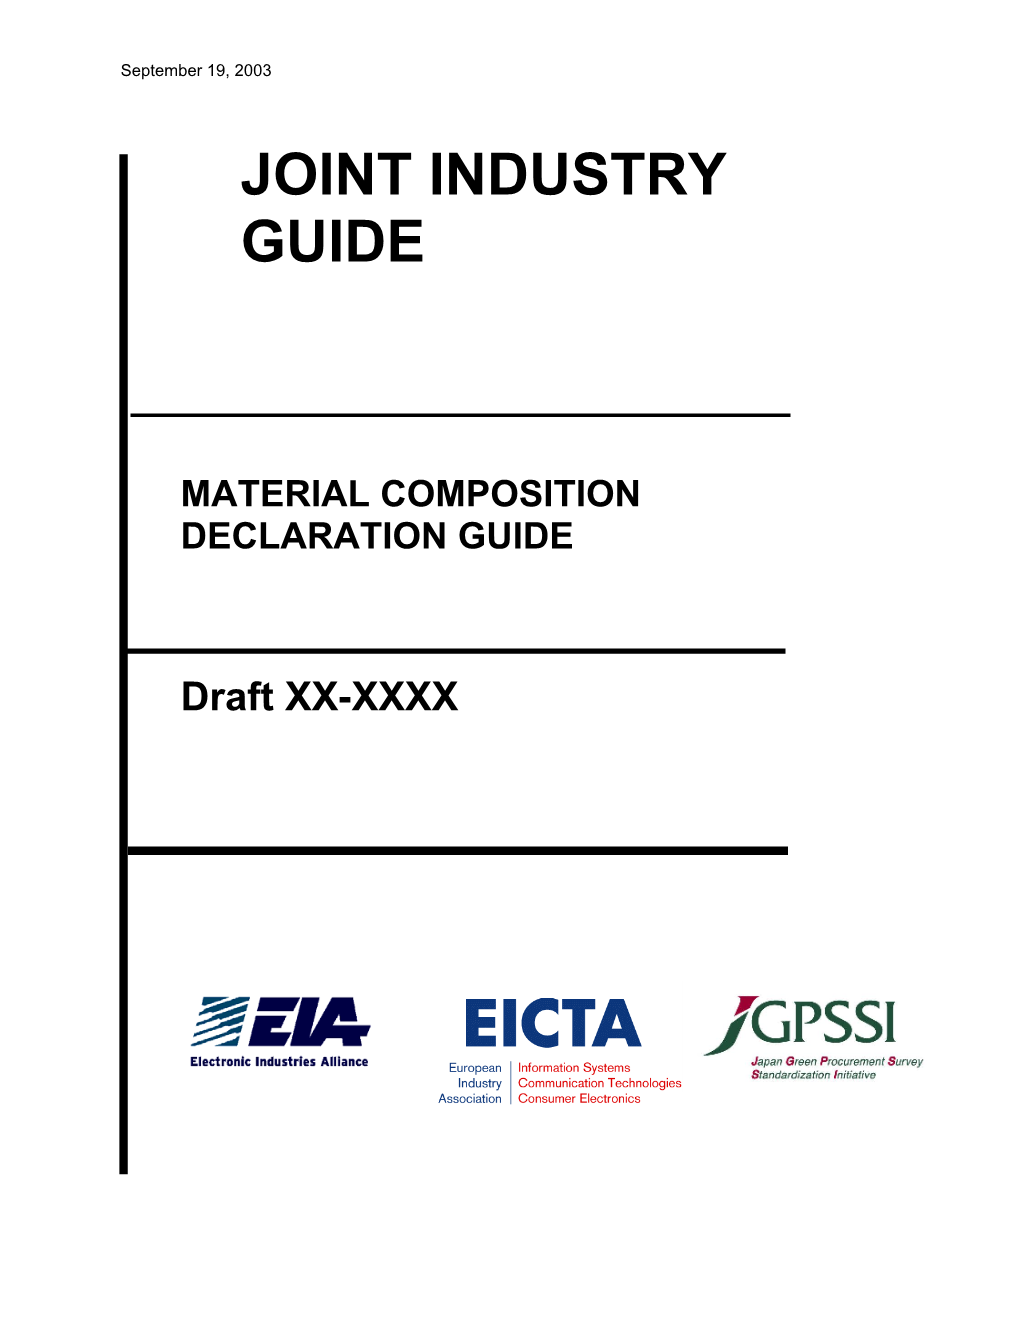 Joint Industry Guide